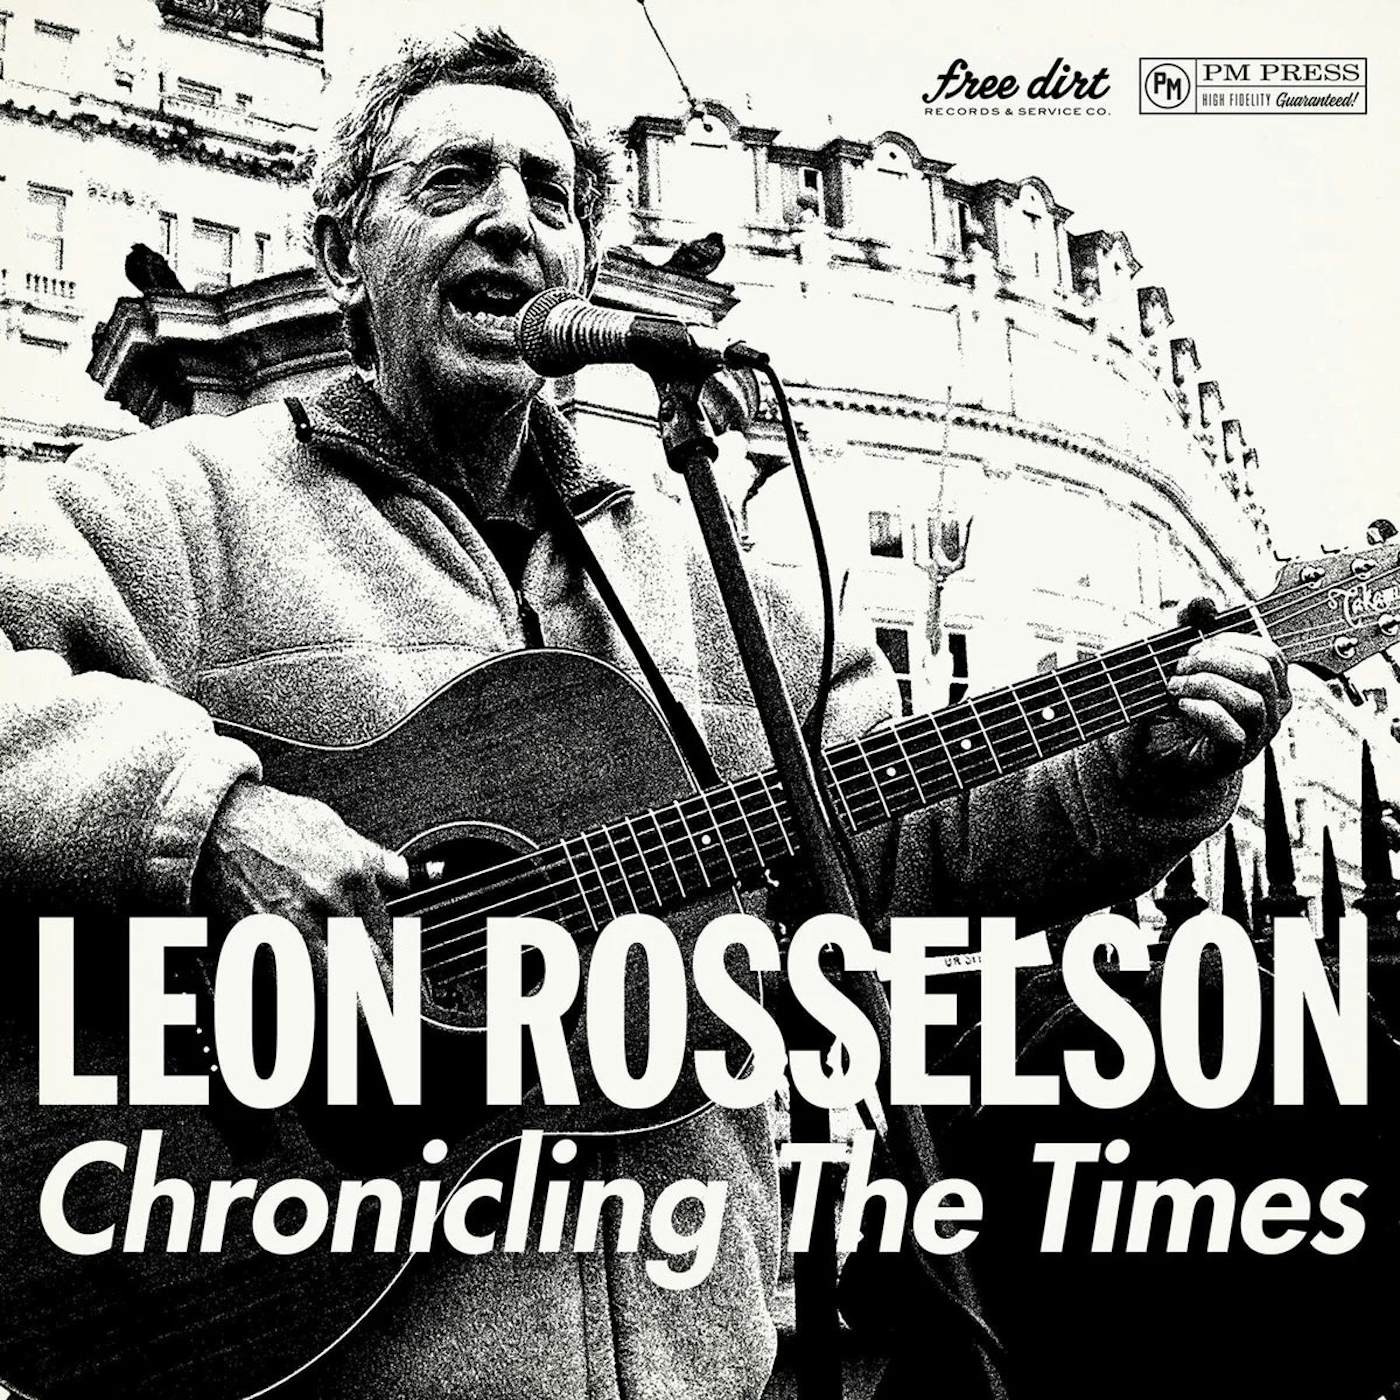 Leon Rosselson LP - Chronicling The Times (Vinyl)